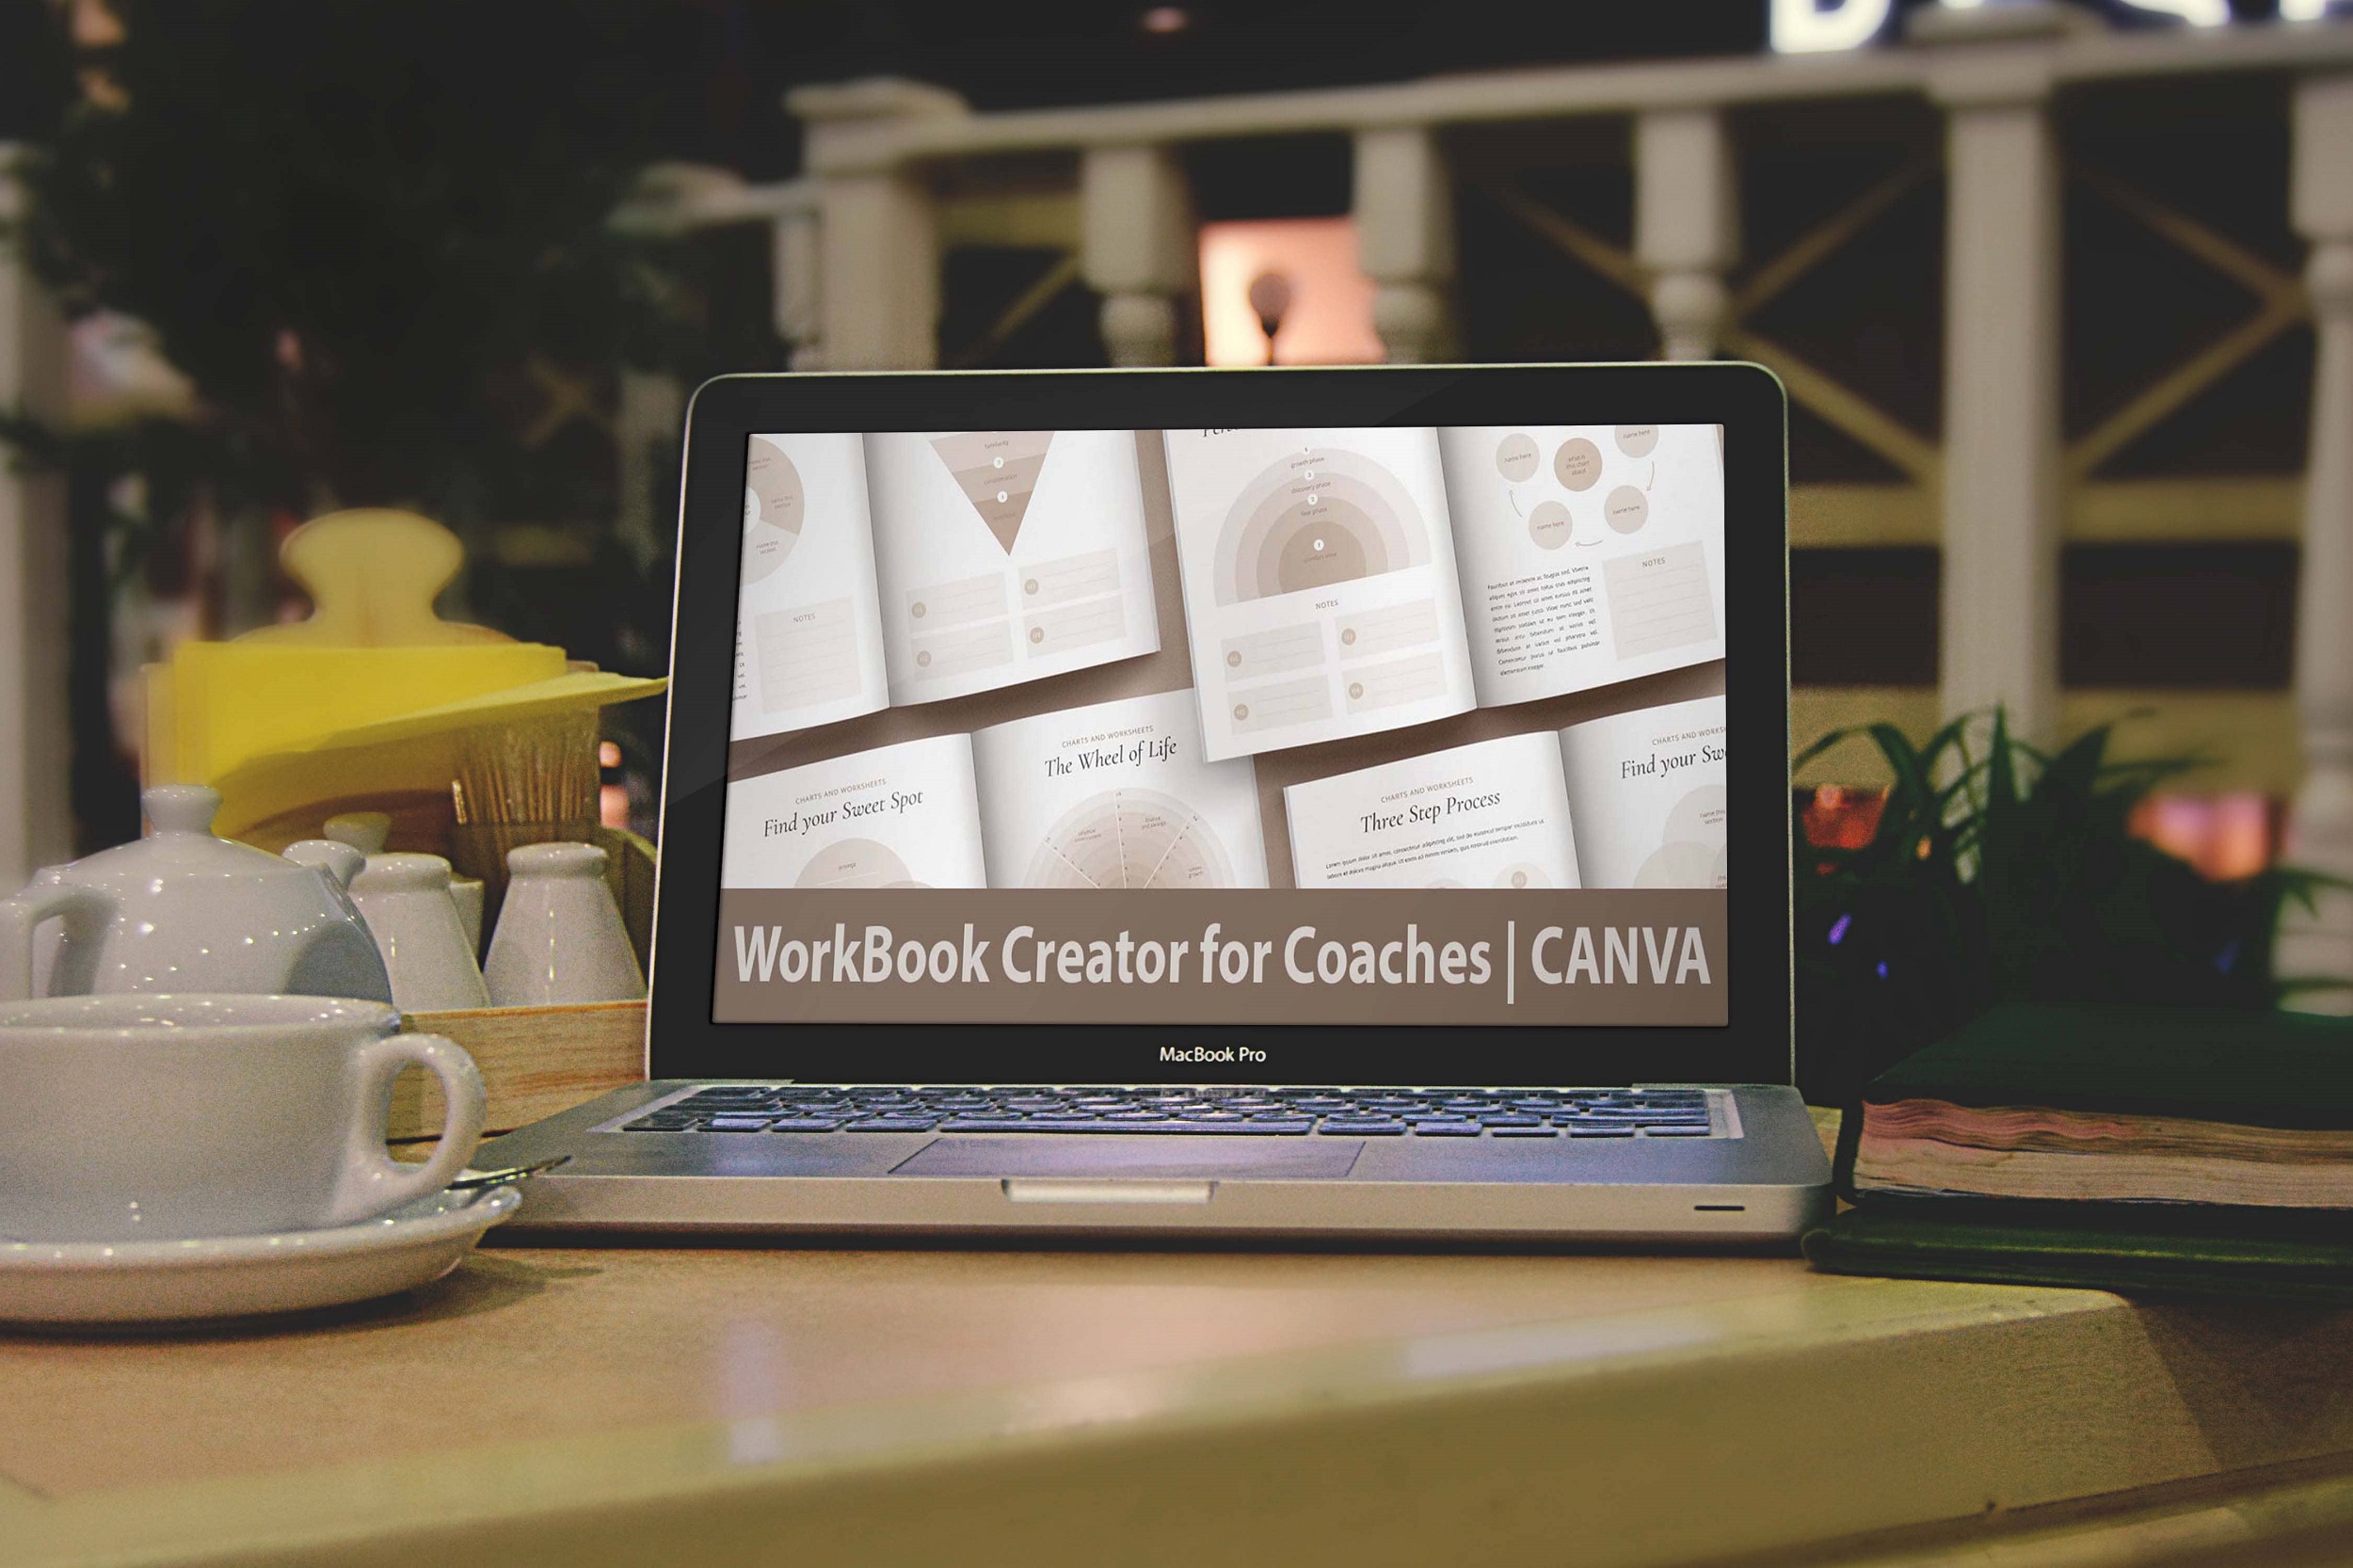 WorkBook Creator for Coaches CANVA notebook mockup.